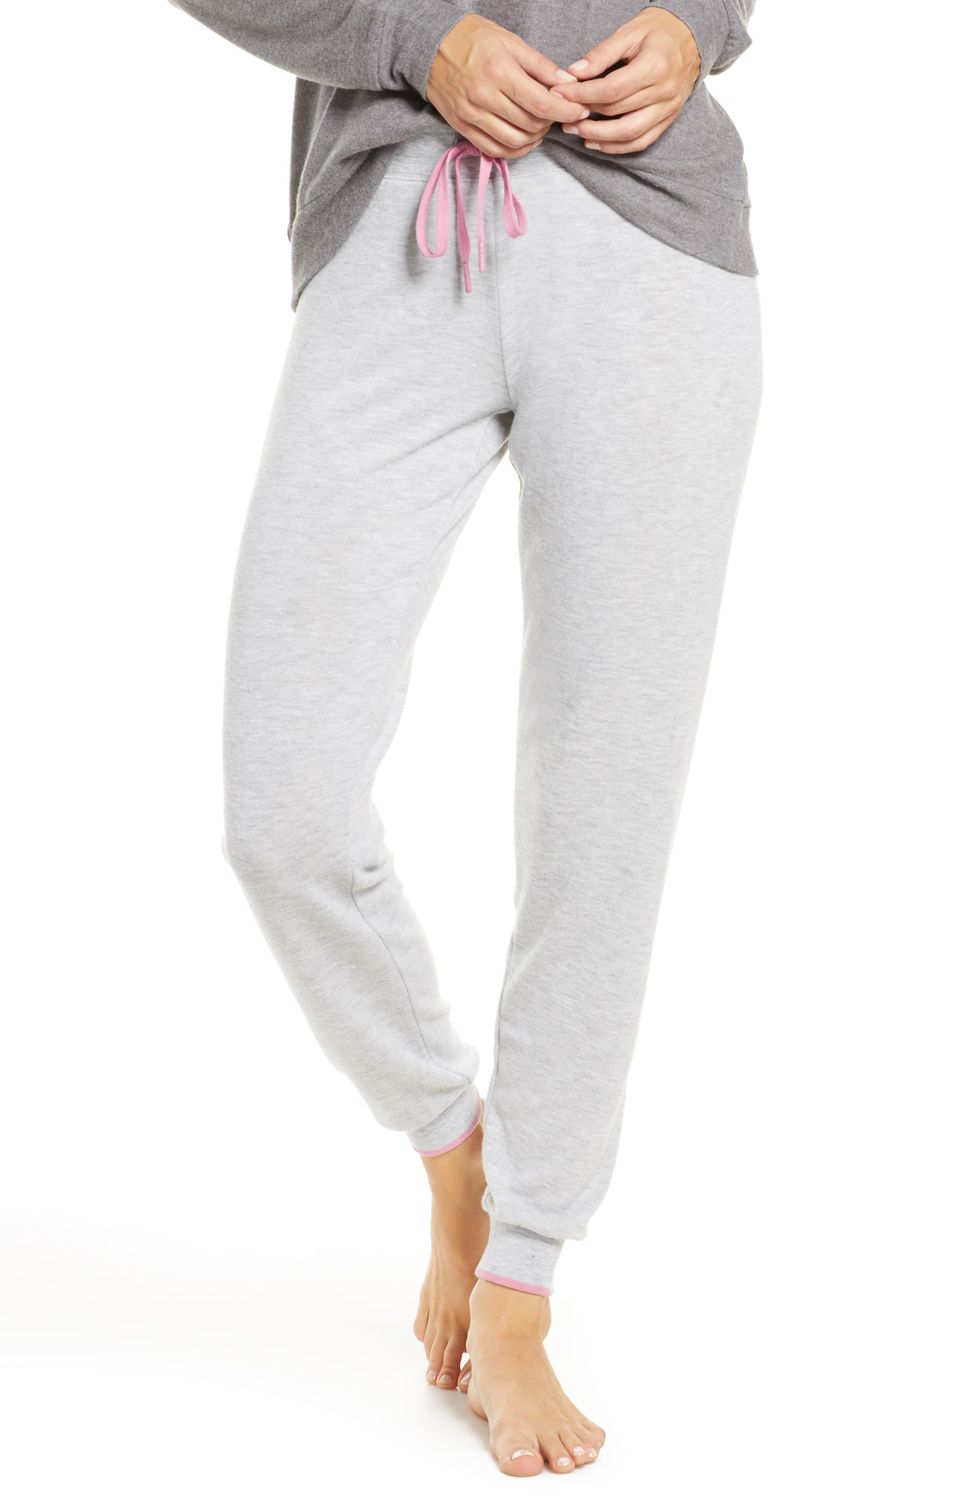 10 Most Comfortable Pajamas for Winter Nights In